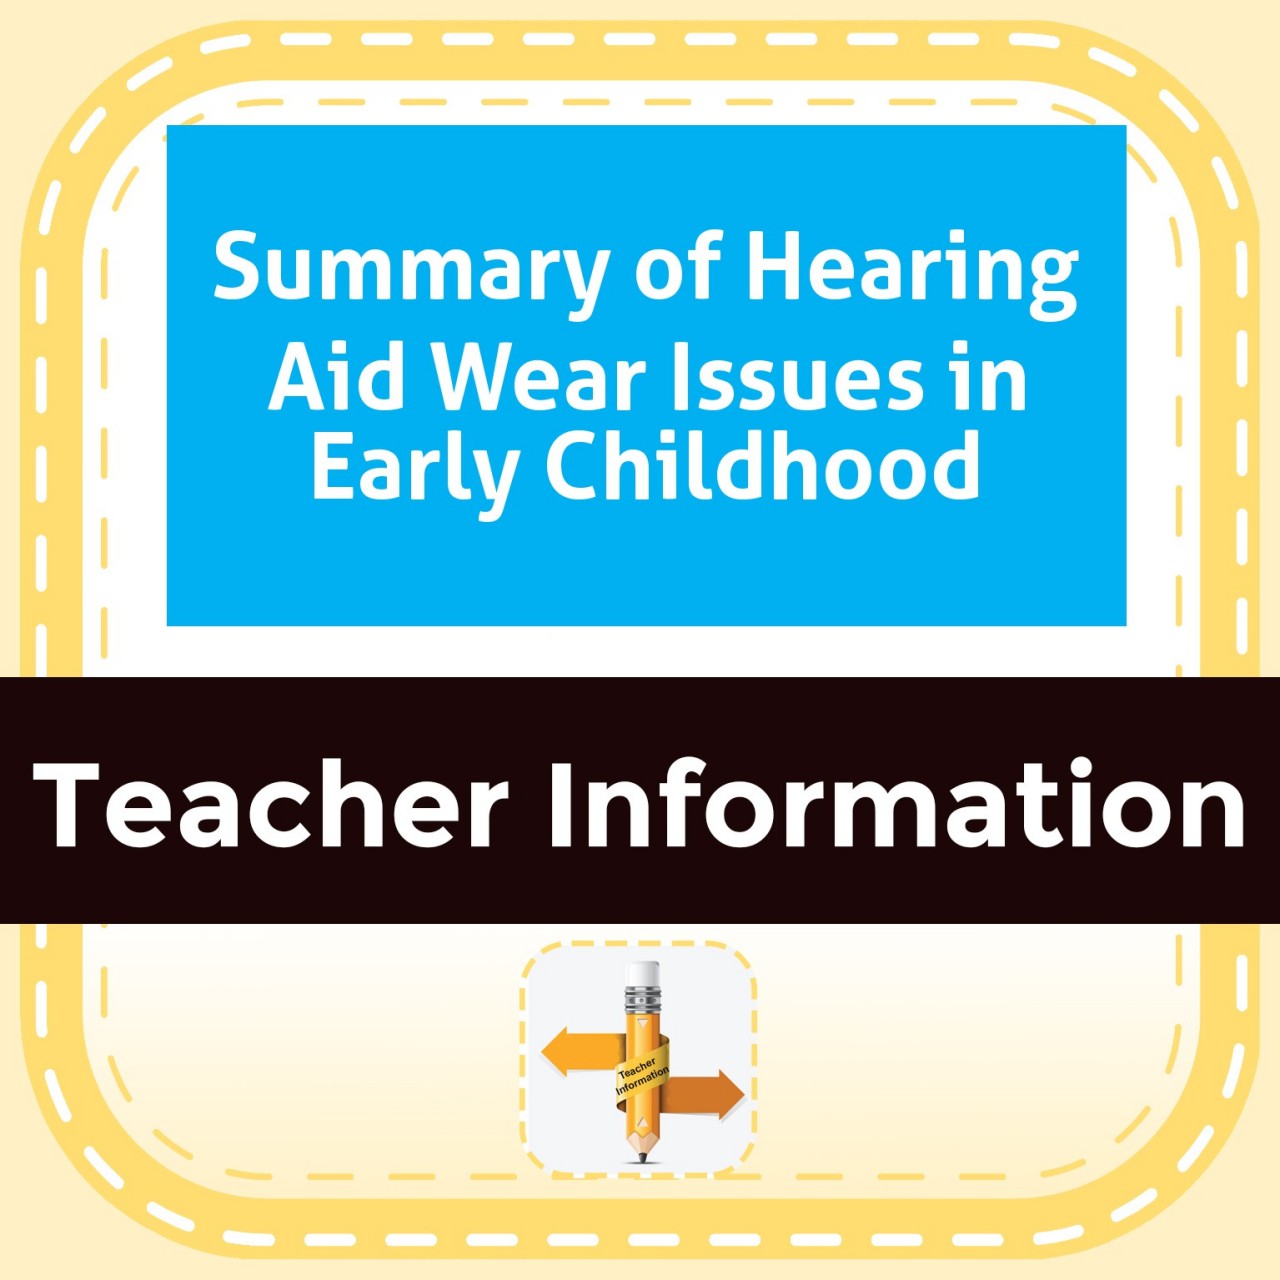 Summary of Hearing Aid Wear Issues in Early Childhood